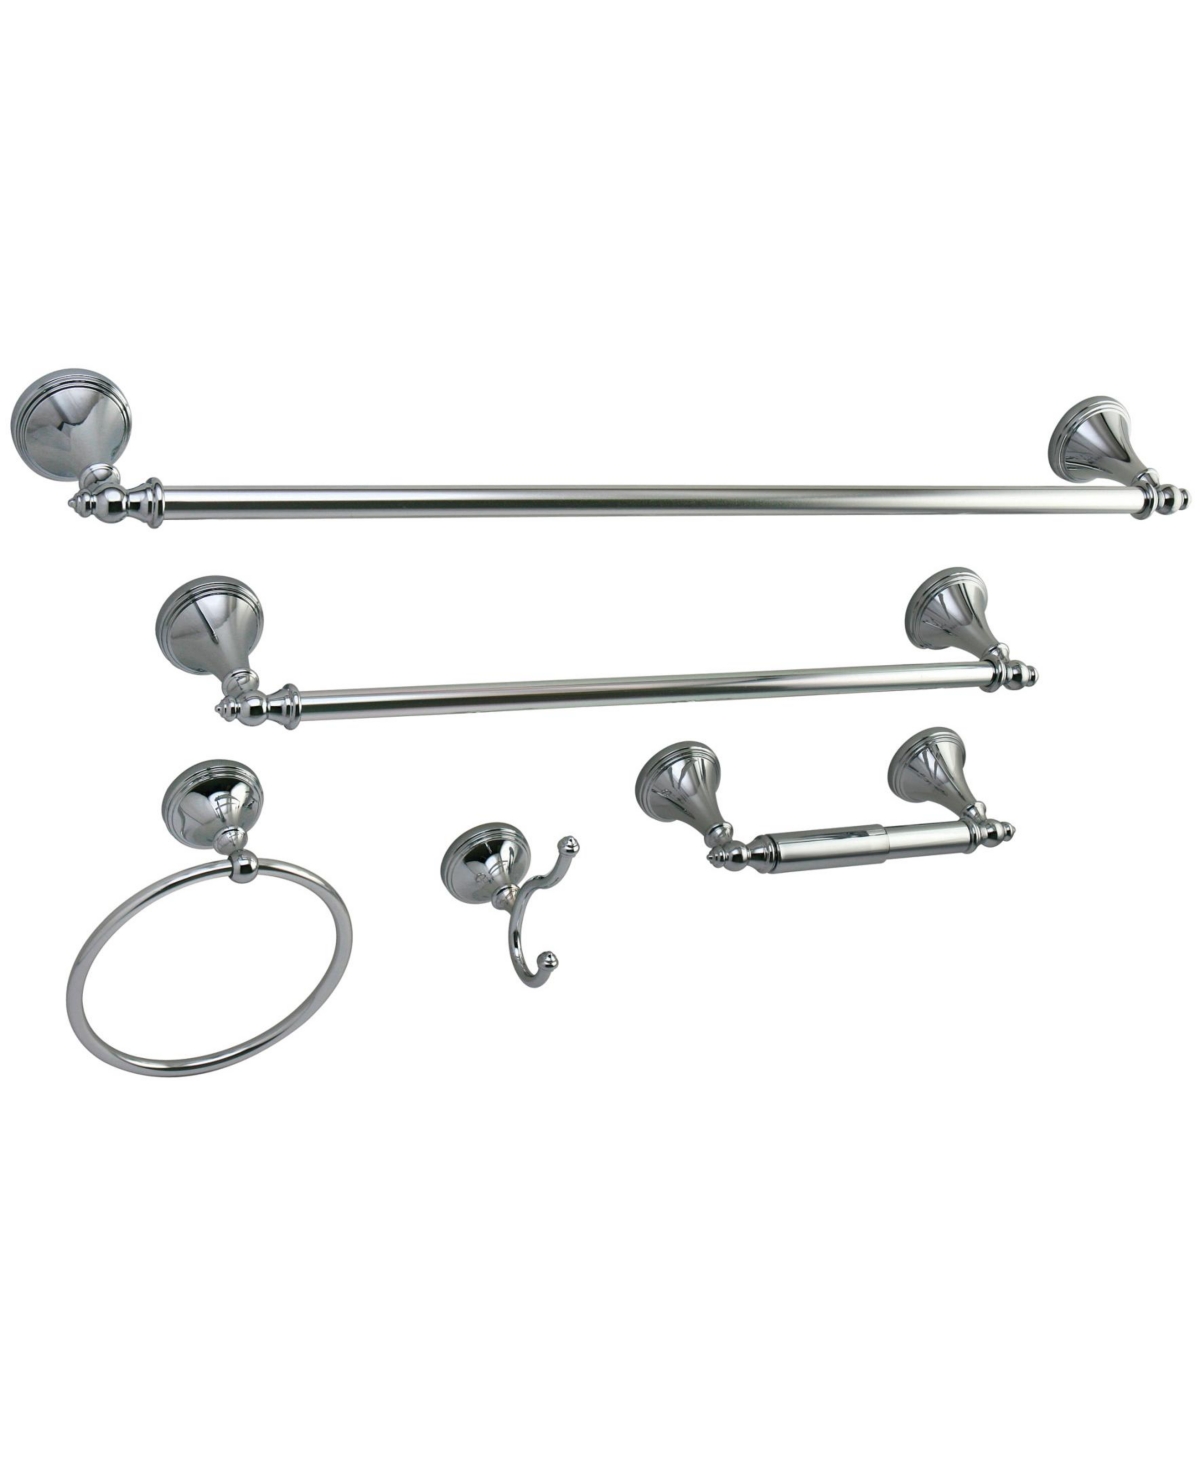 Kingston Brass Naples 18-Inch and 24-Inch Towel Bar Bathroom Accessory Set in Polished Chrome Bedding